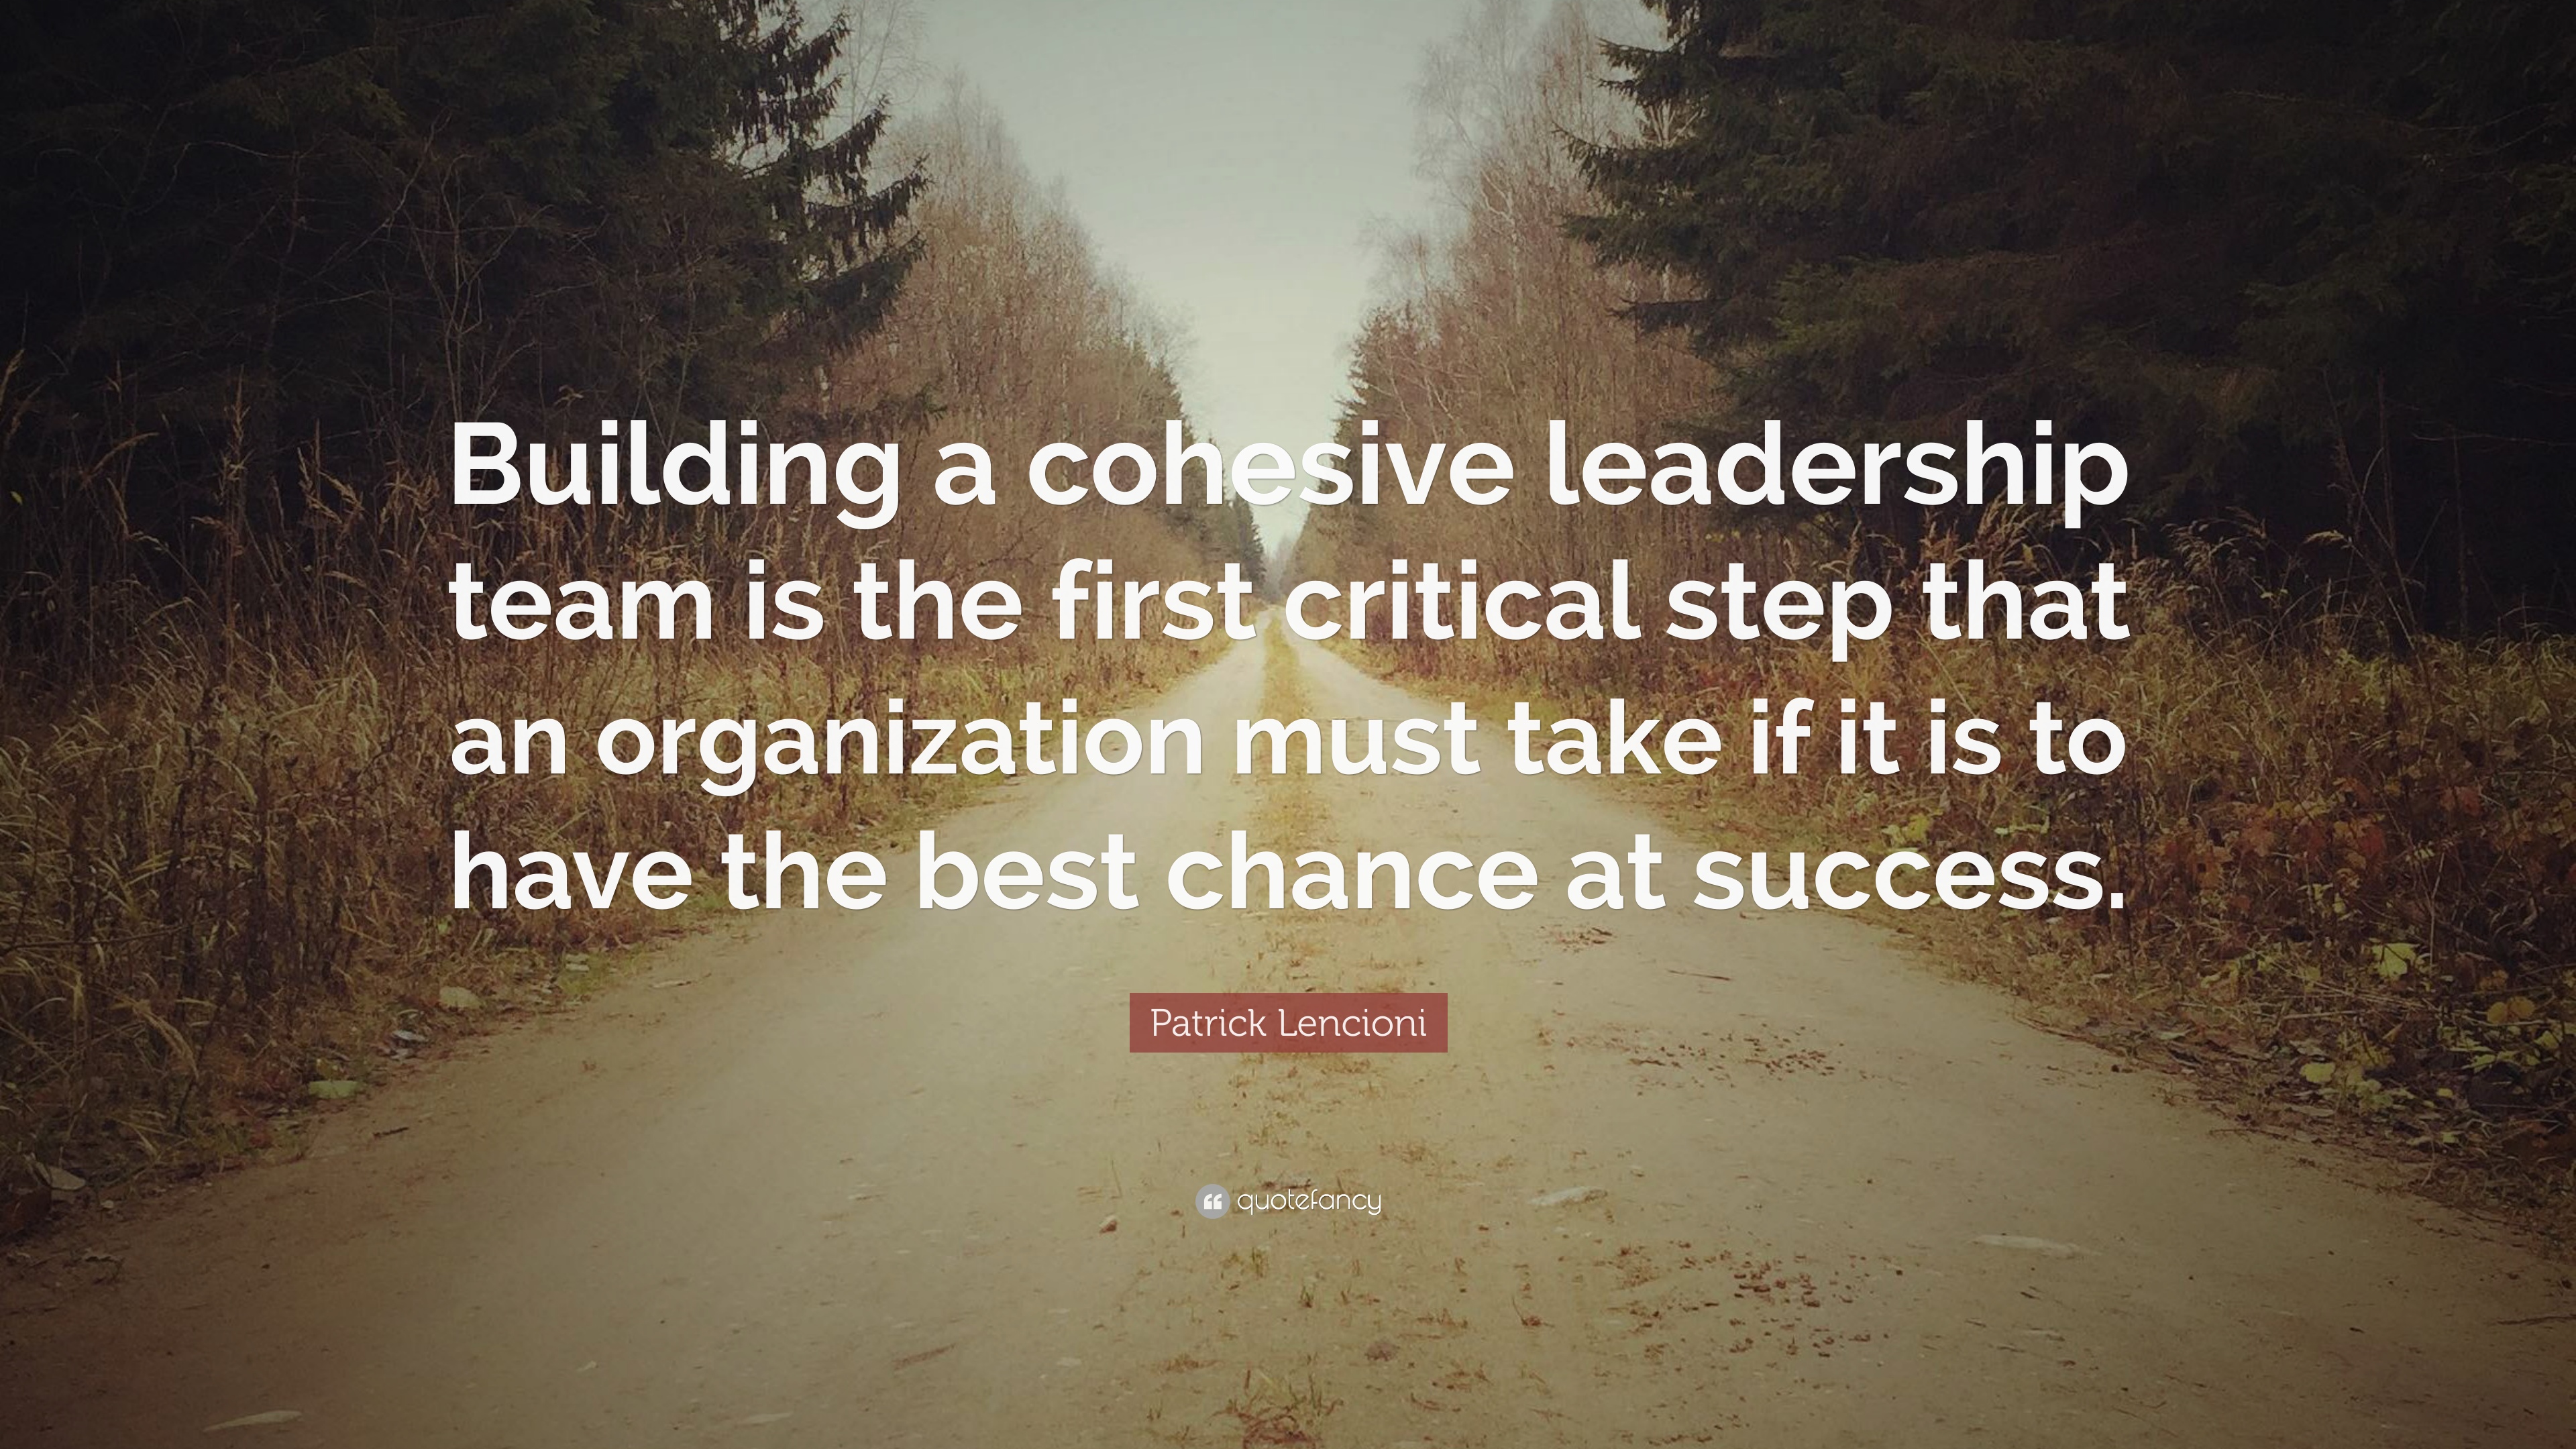 building a cohesive leadership team is the first critical step that an organization must take if it is to have the best chance at success. patrick lencioni